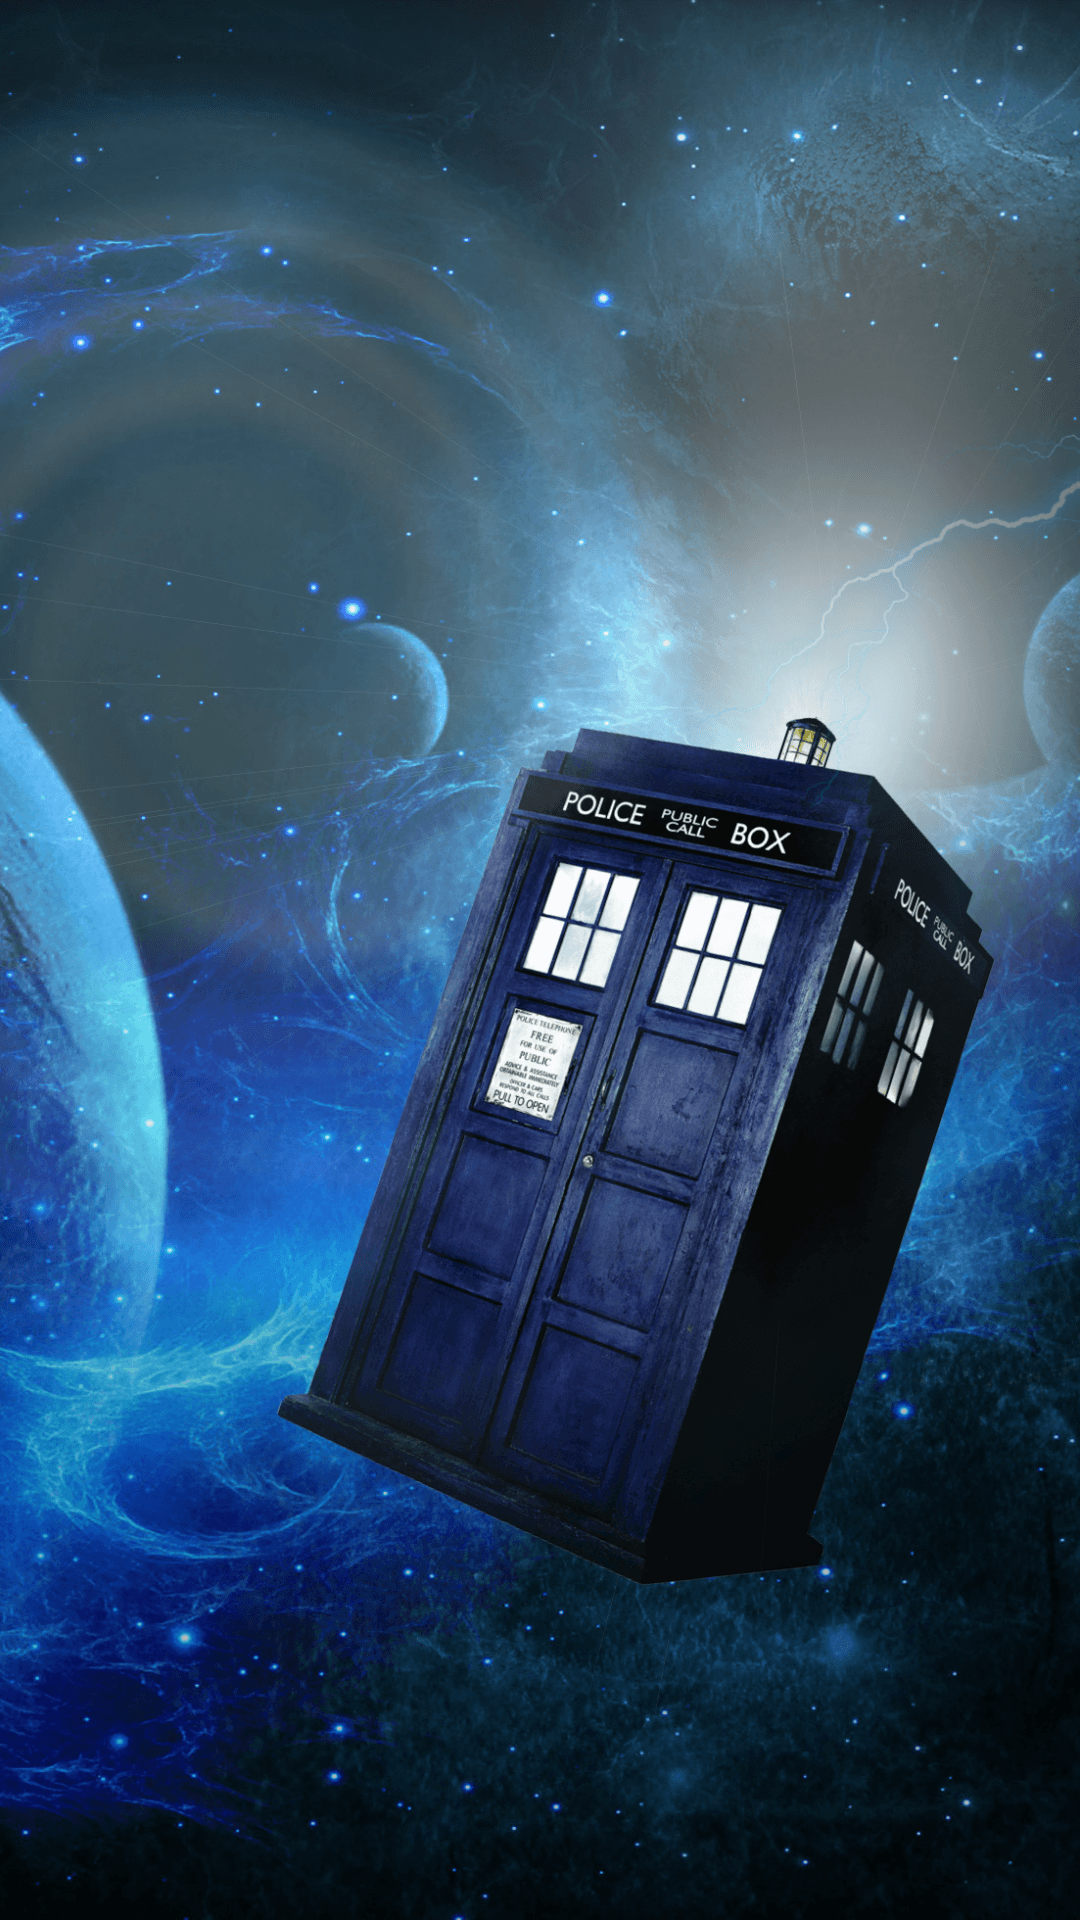 Dr who iphone wallpapers